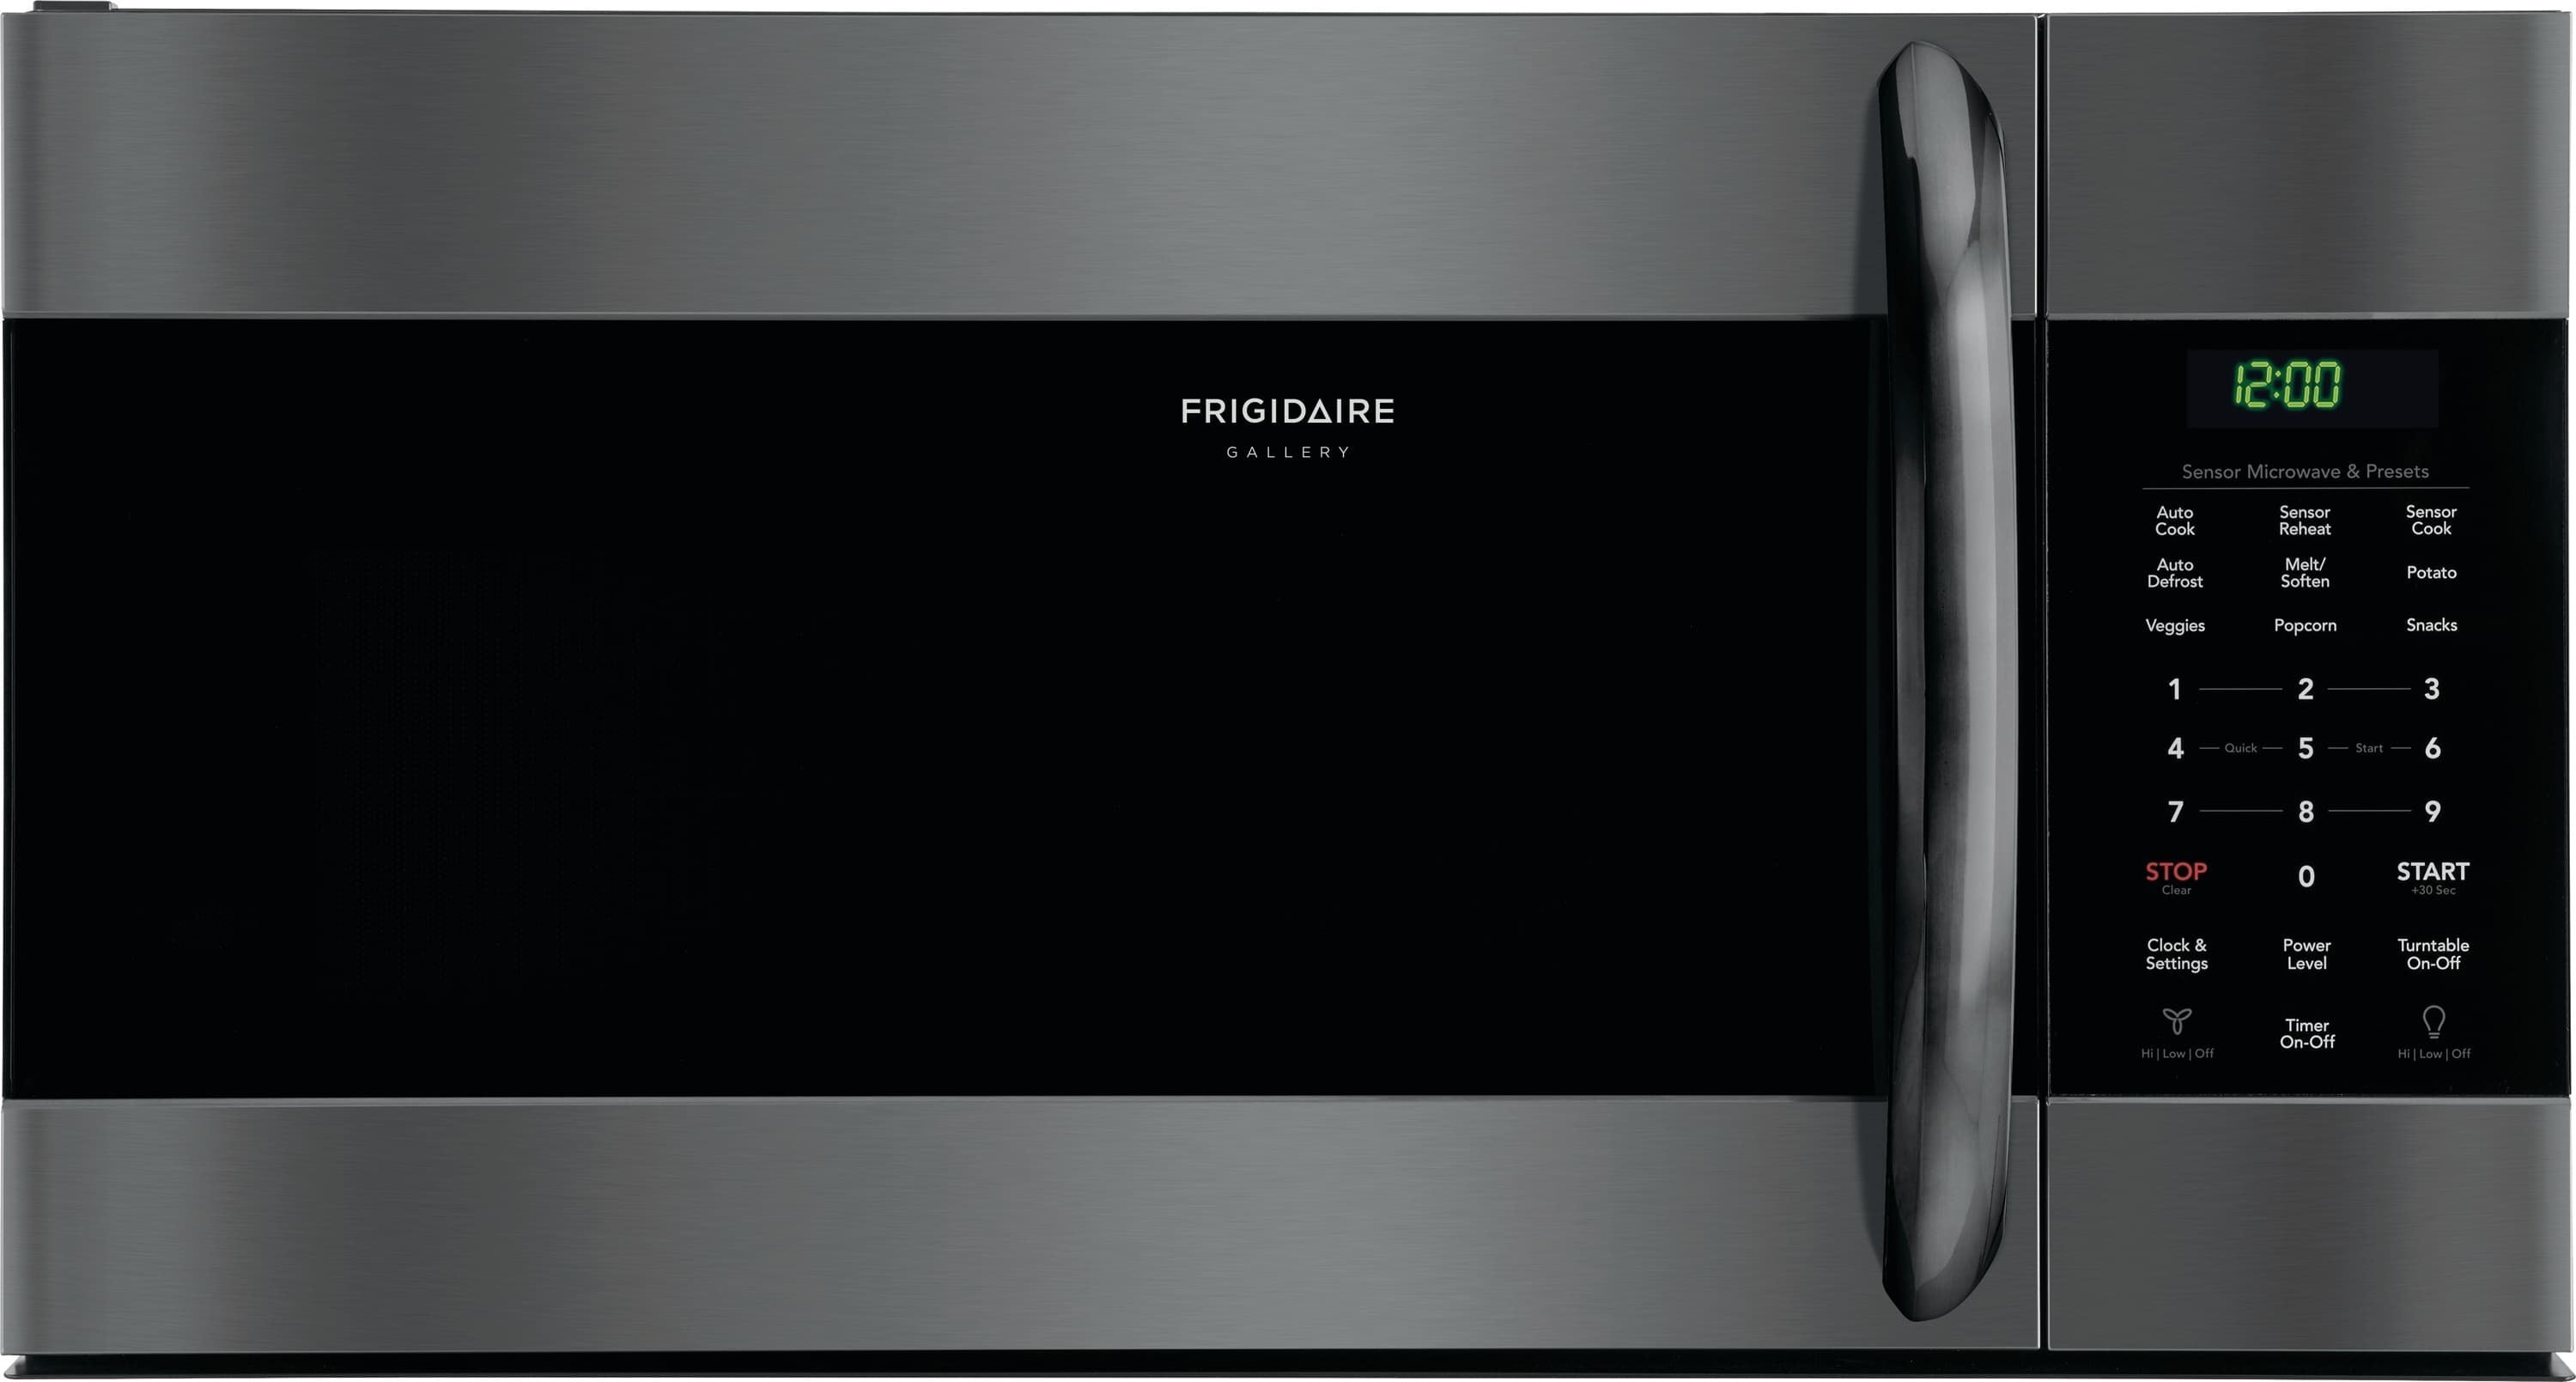 Frigidaire 1.7 Cu. Ft. Over-The-Range Microwave (Black Stainless Steel